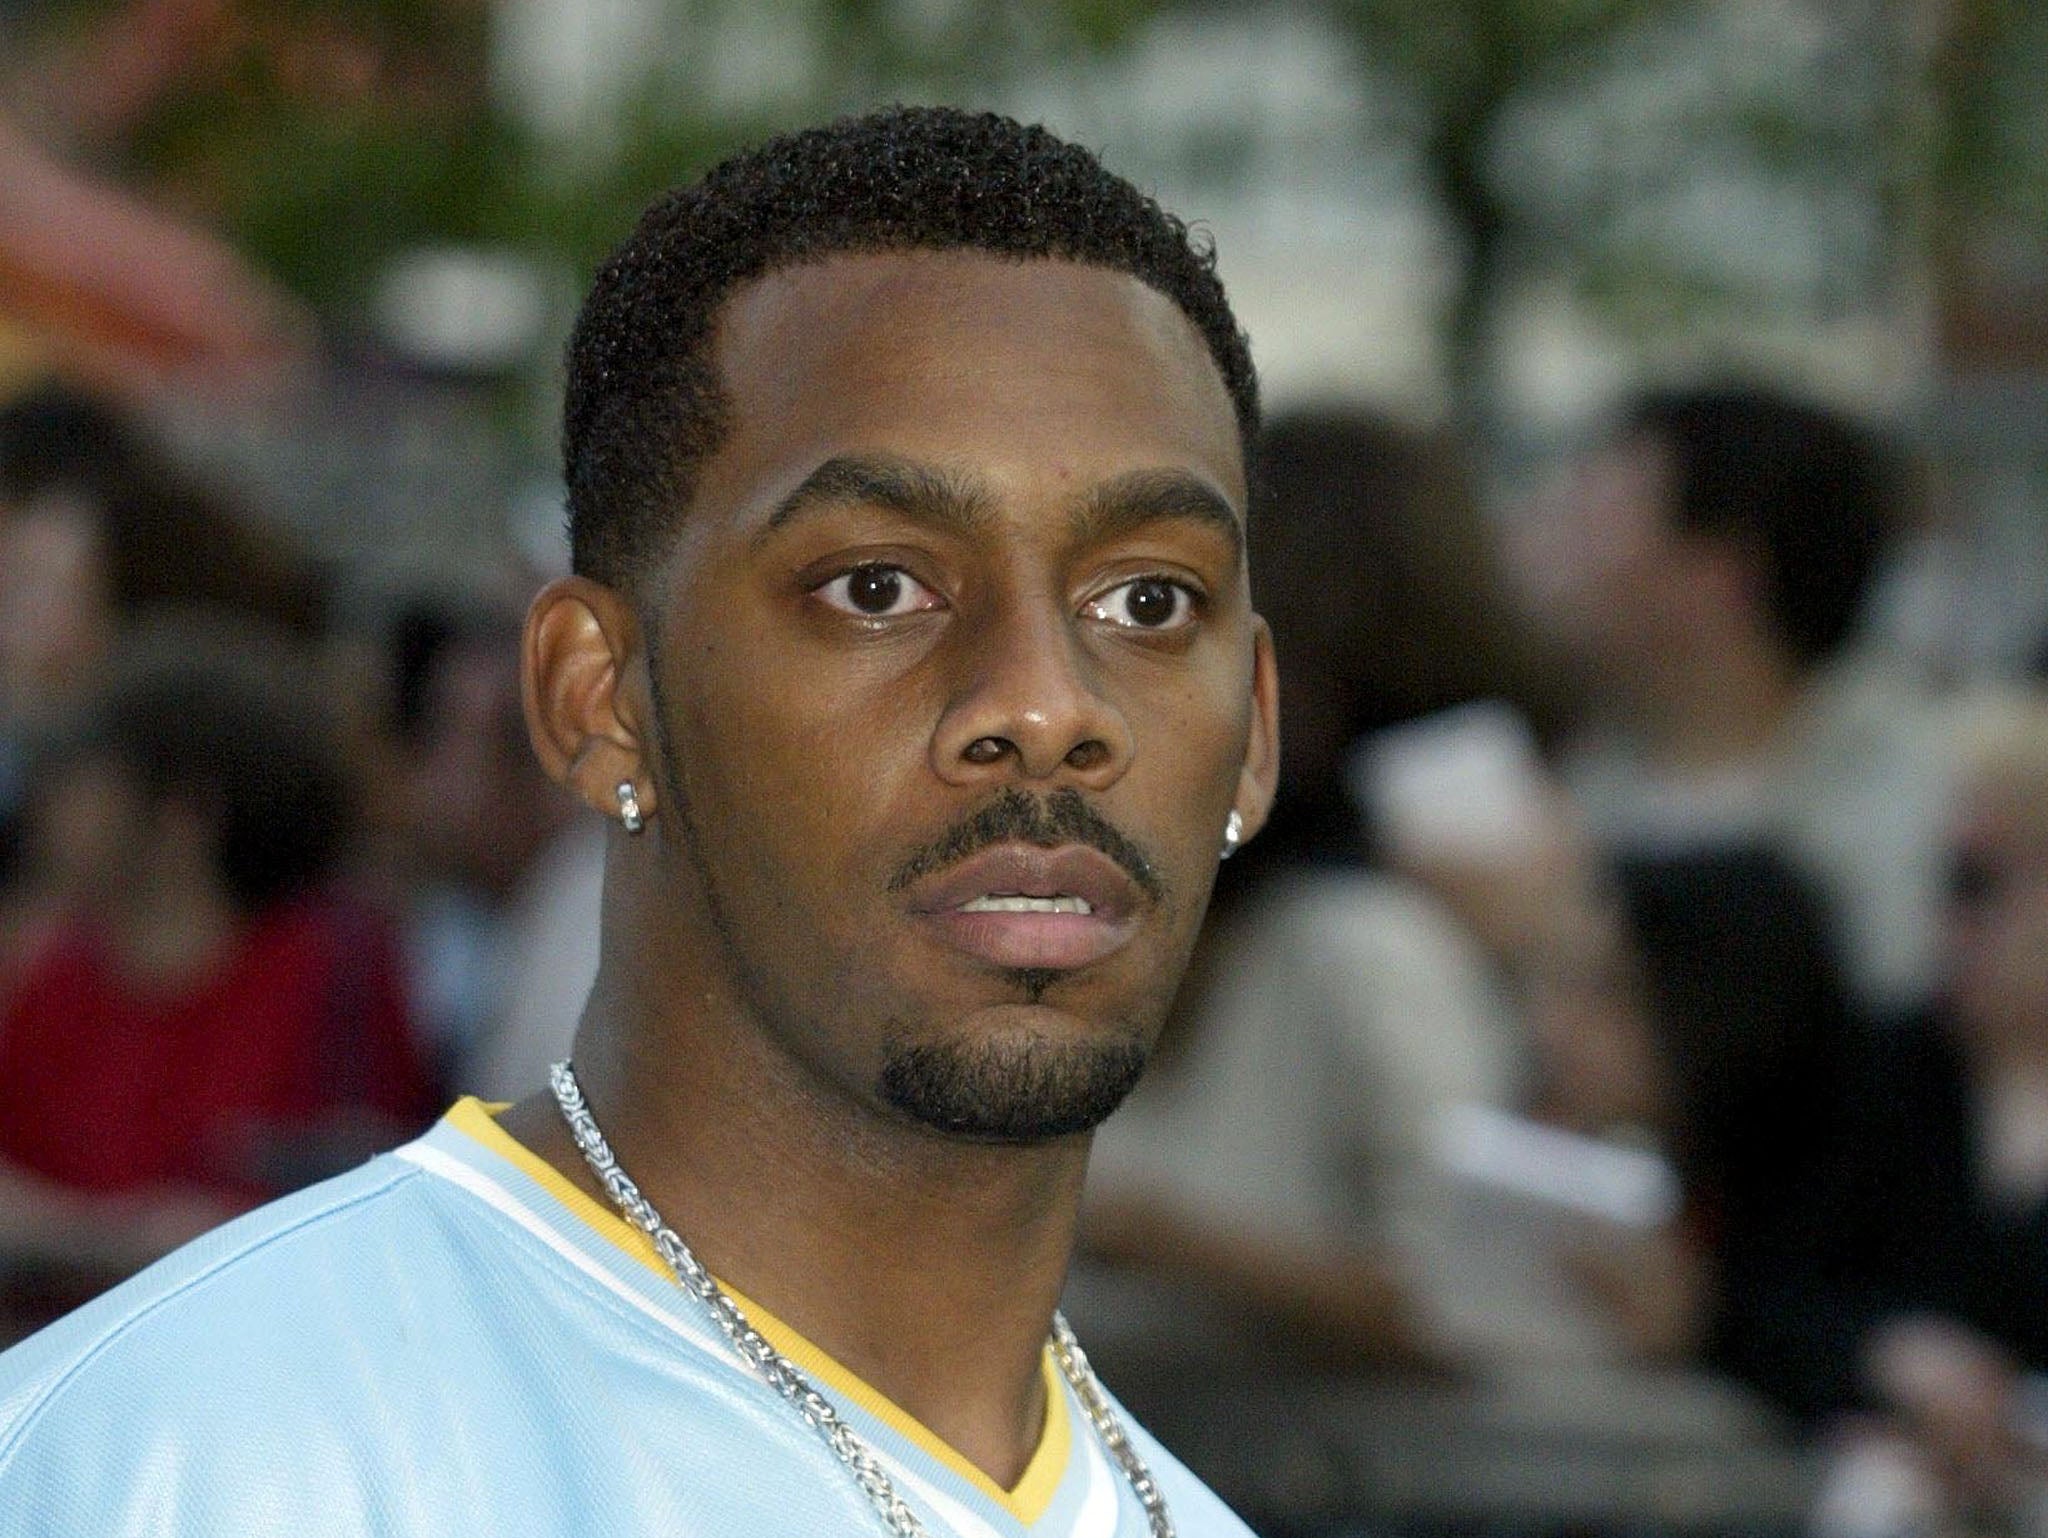 Richard Blackwood in 2002 - a year before he filed for bankruptcy